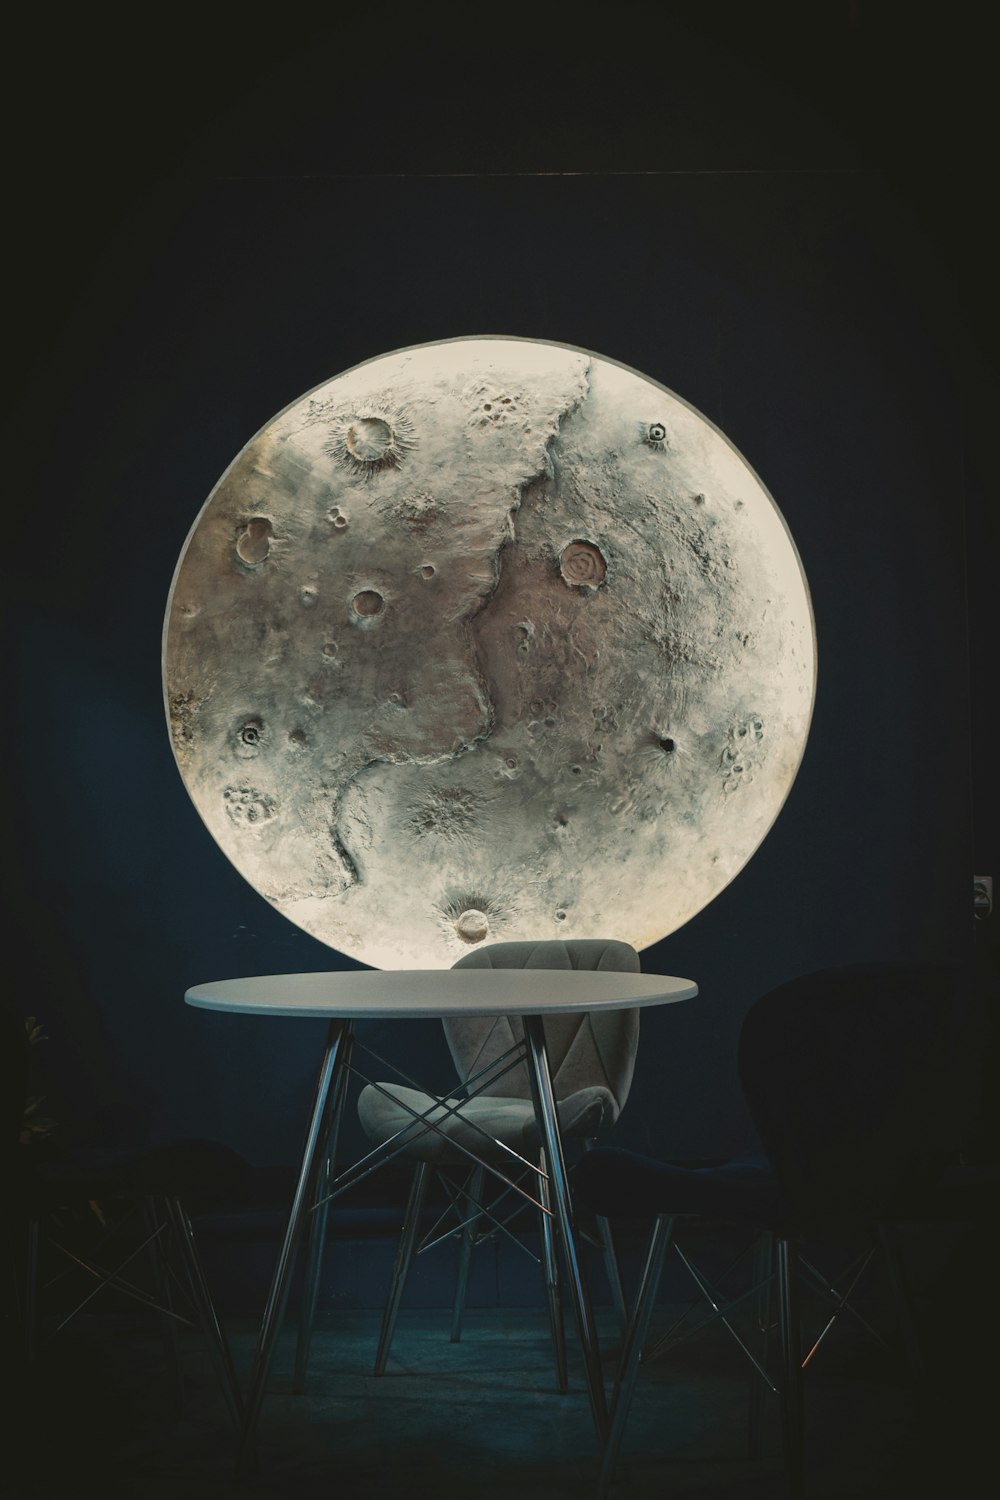 a large moon sitting on top of a table